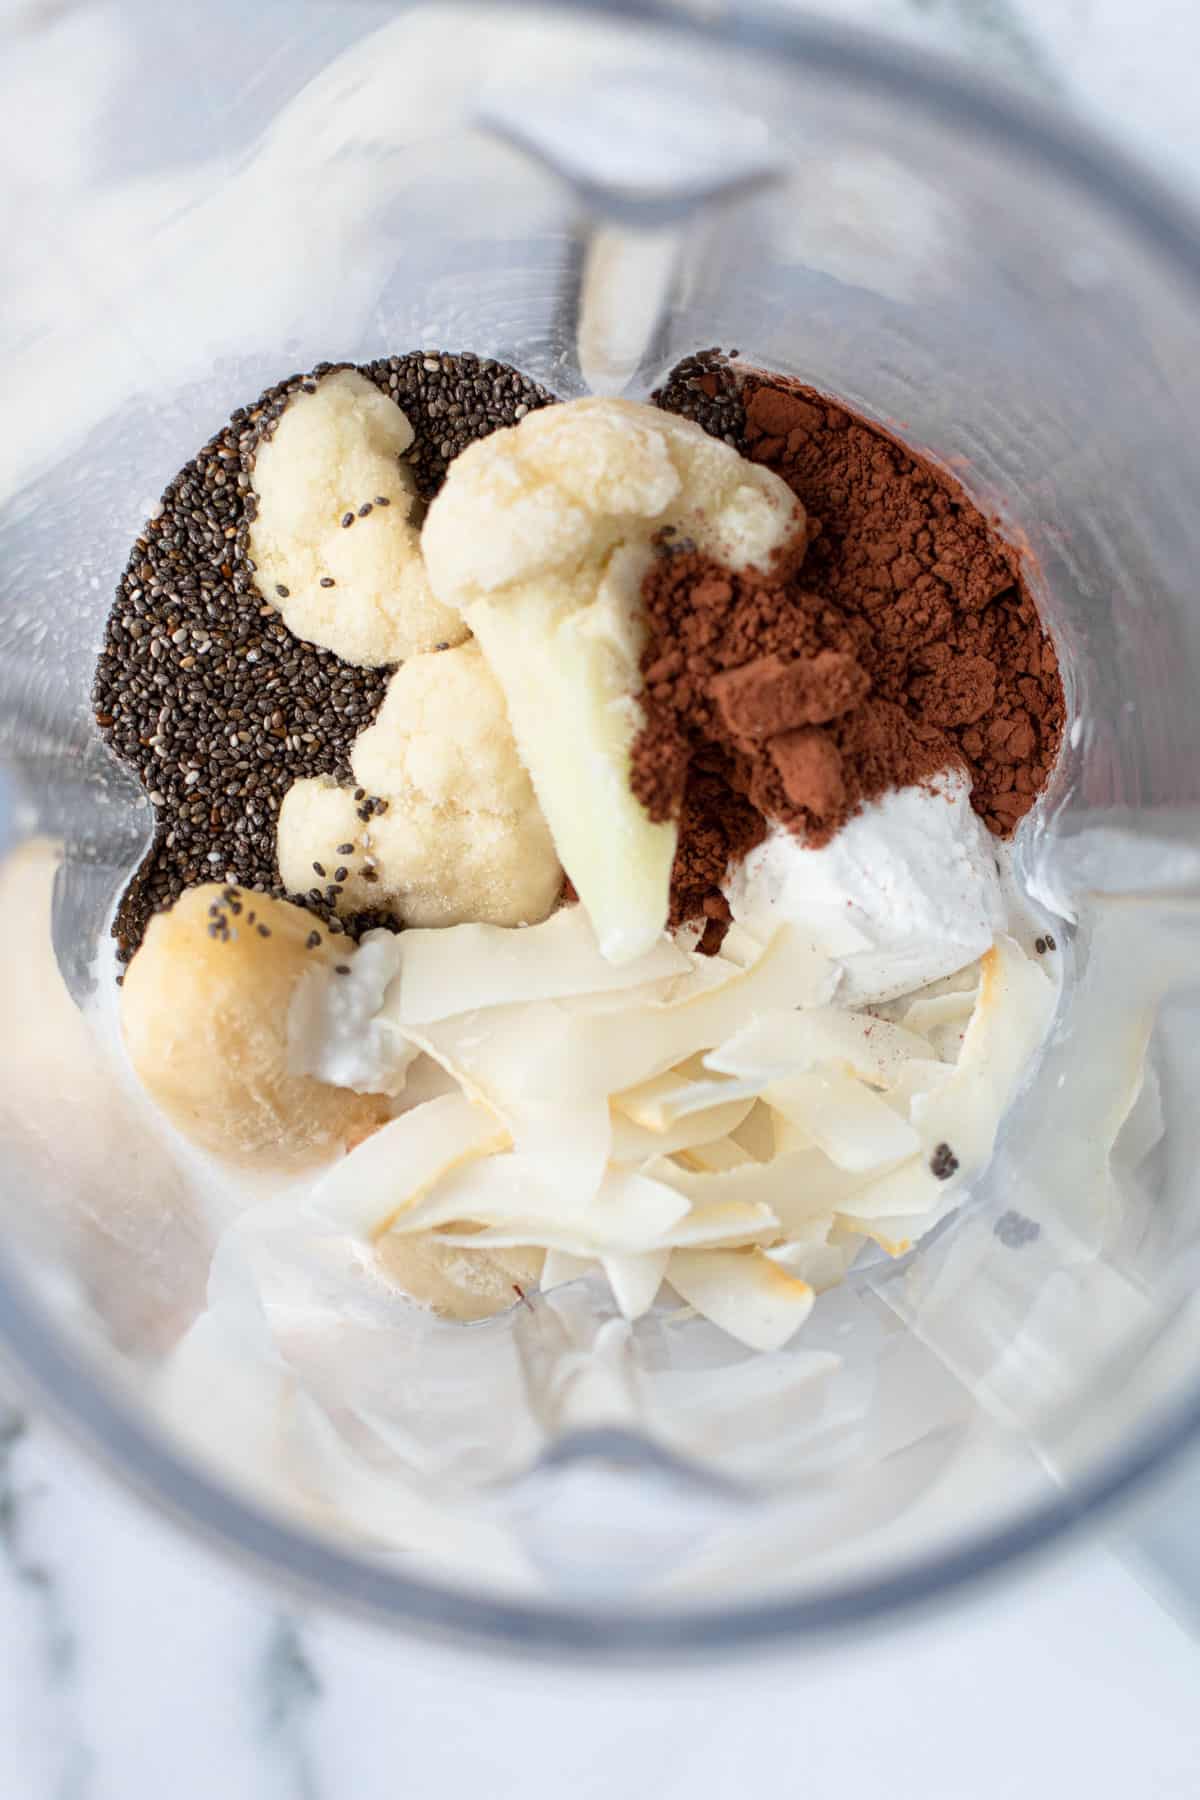 Ingredients for chocolate coconut smoothie including cocoa, banana, coconut and chocolate.